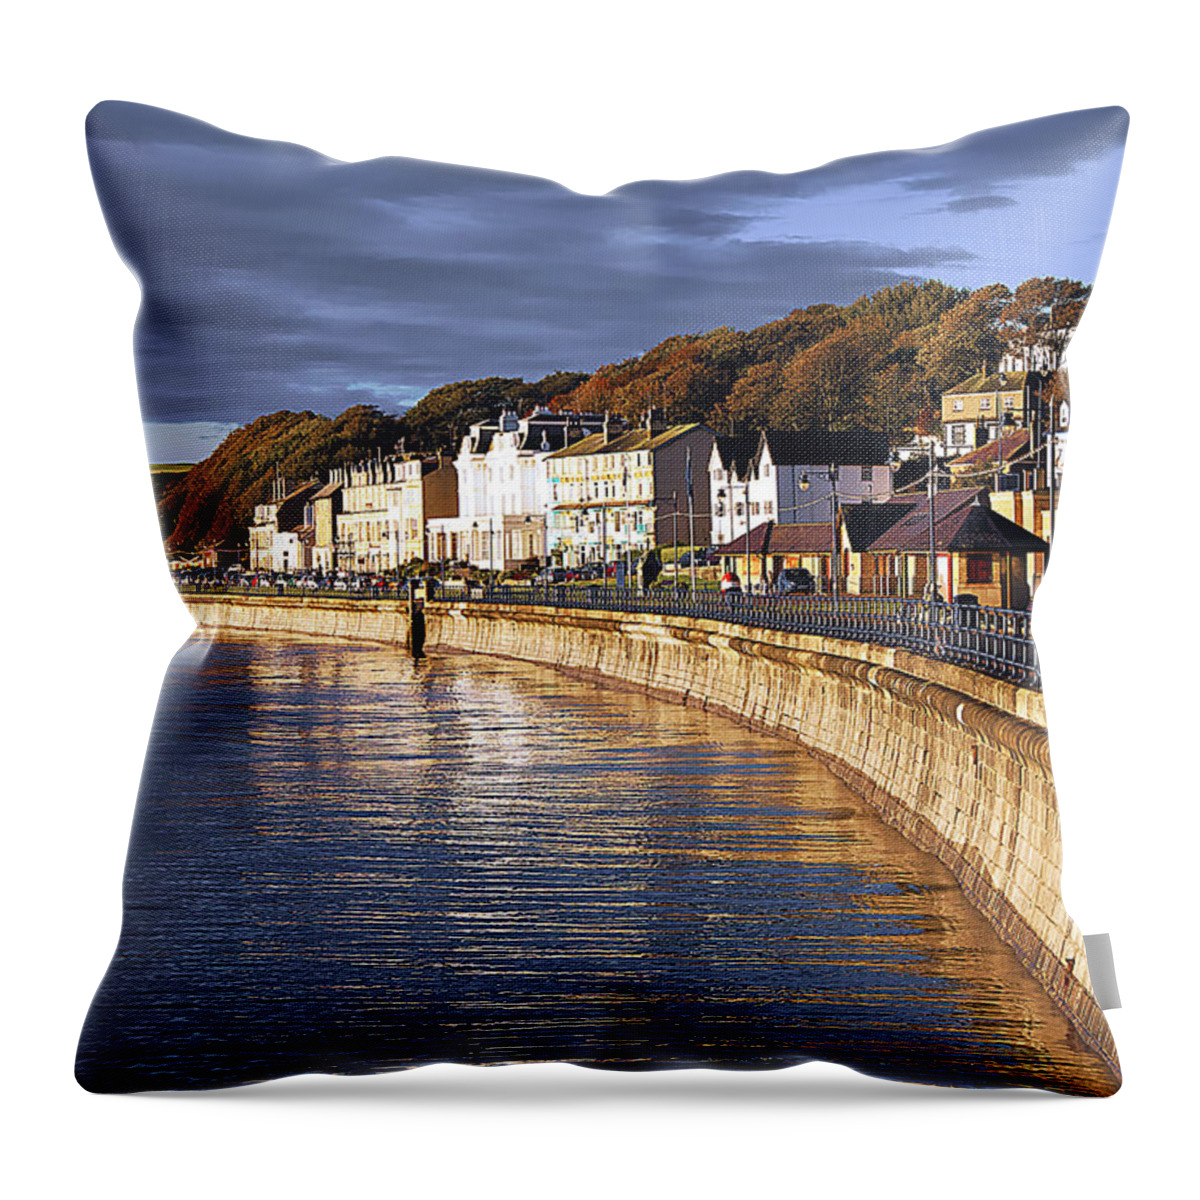 Aqua Throw Pillow featuring the photograph Filey #1 by Svetlana Sewell